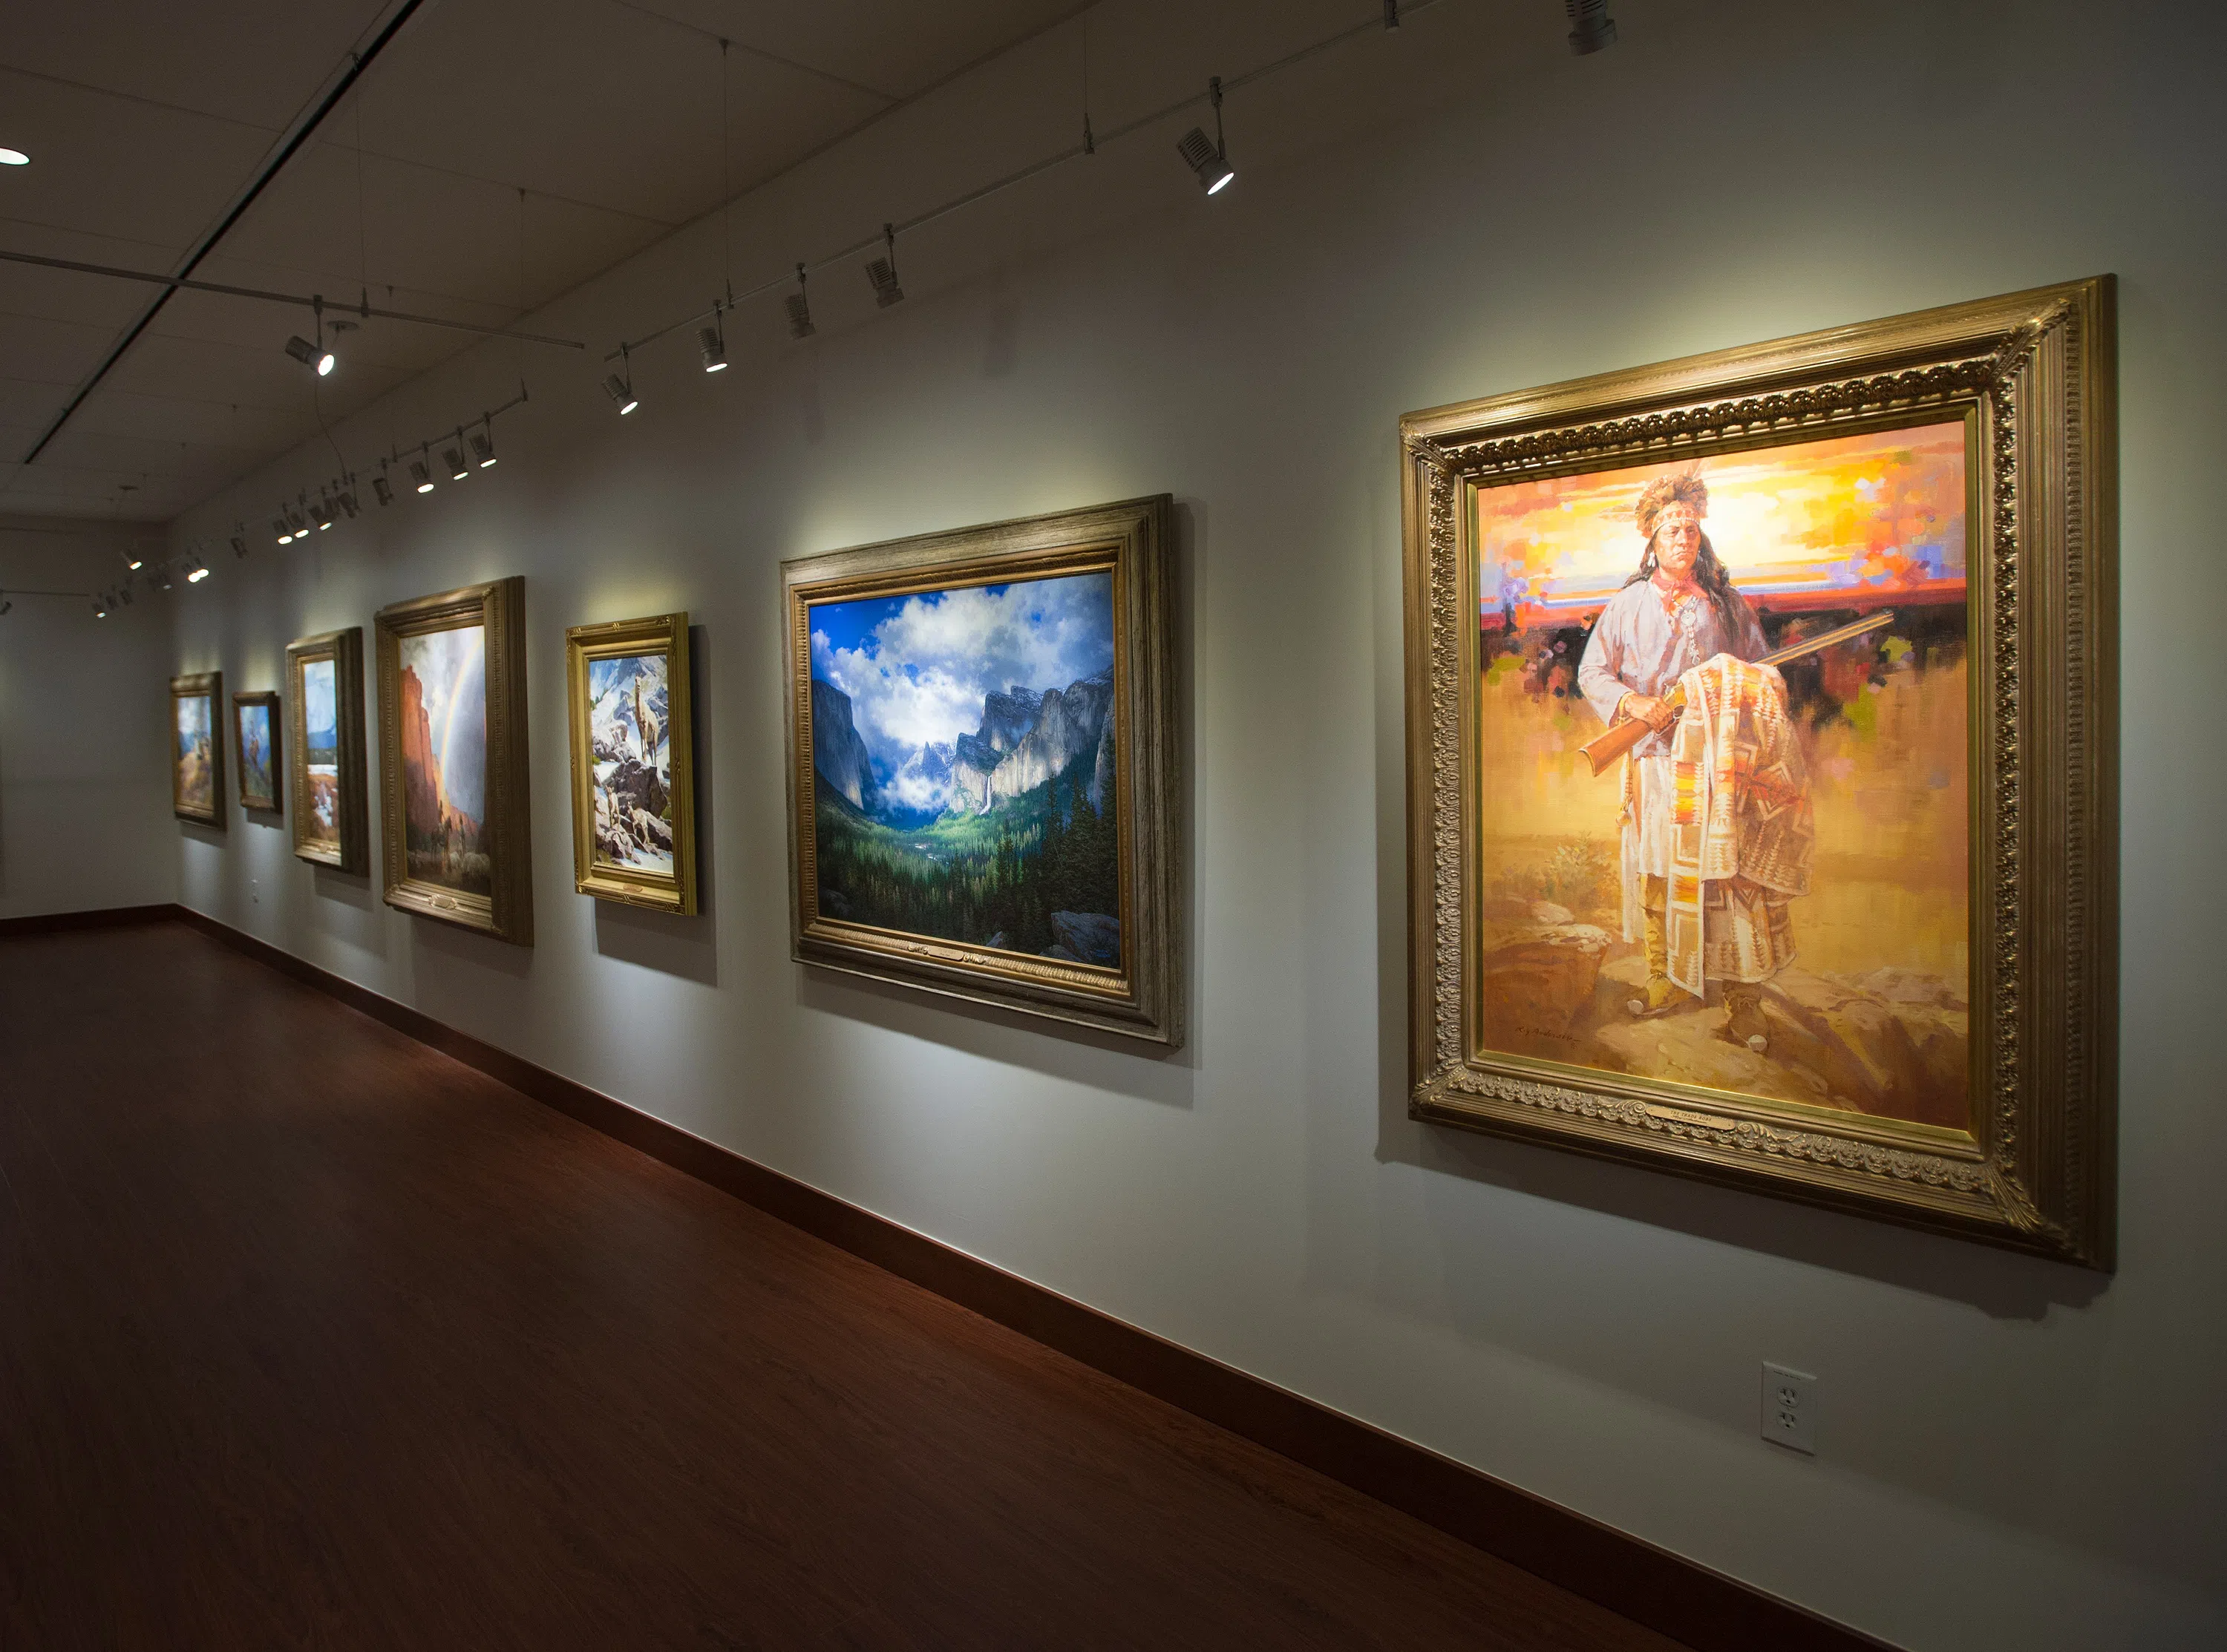 A wall of framed artwork in the Huntley art gallery